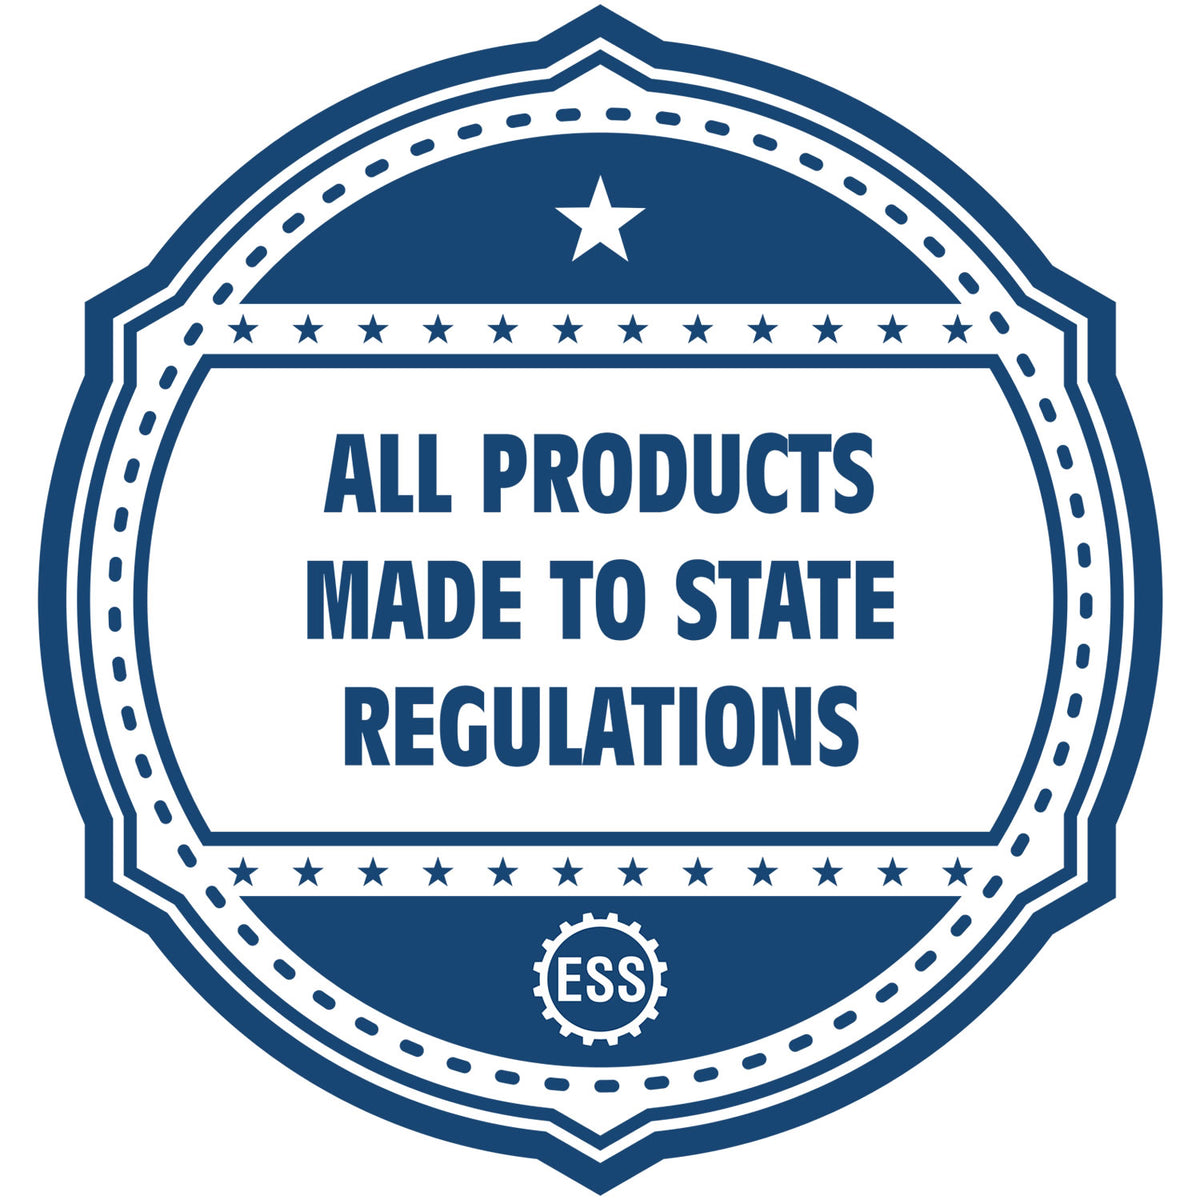 An icon or badge element for the Soft Nevada Professional Engineer Seal showing that this product is made in compliance with state regulations.